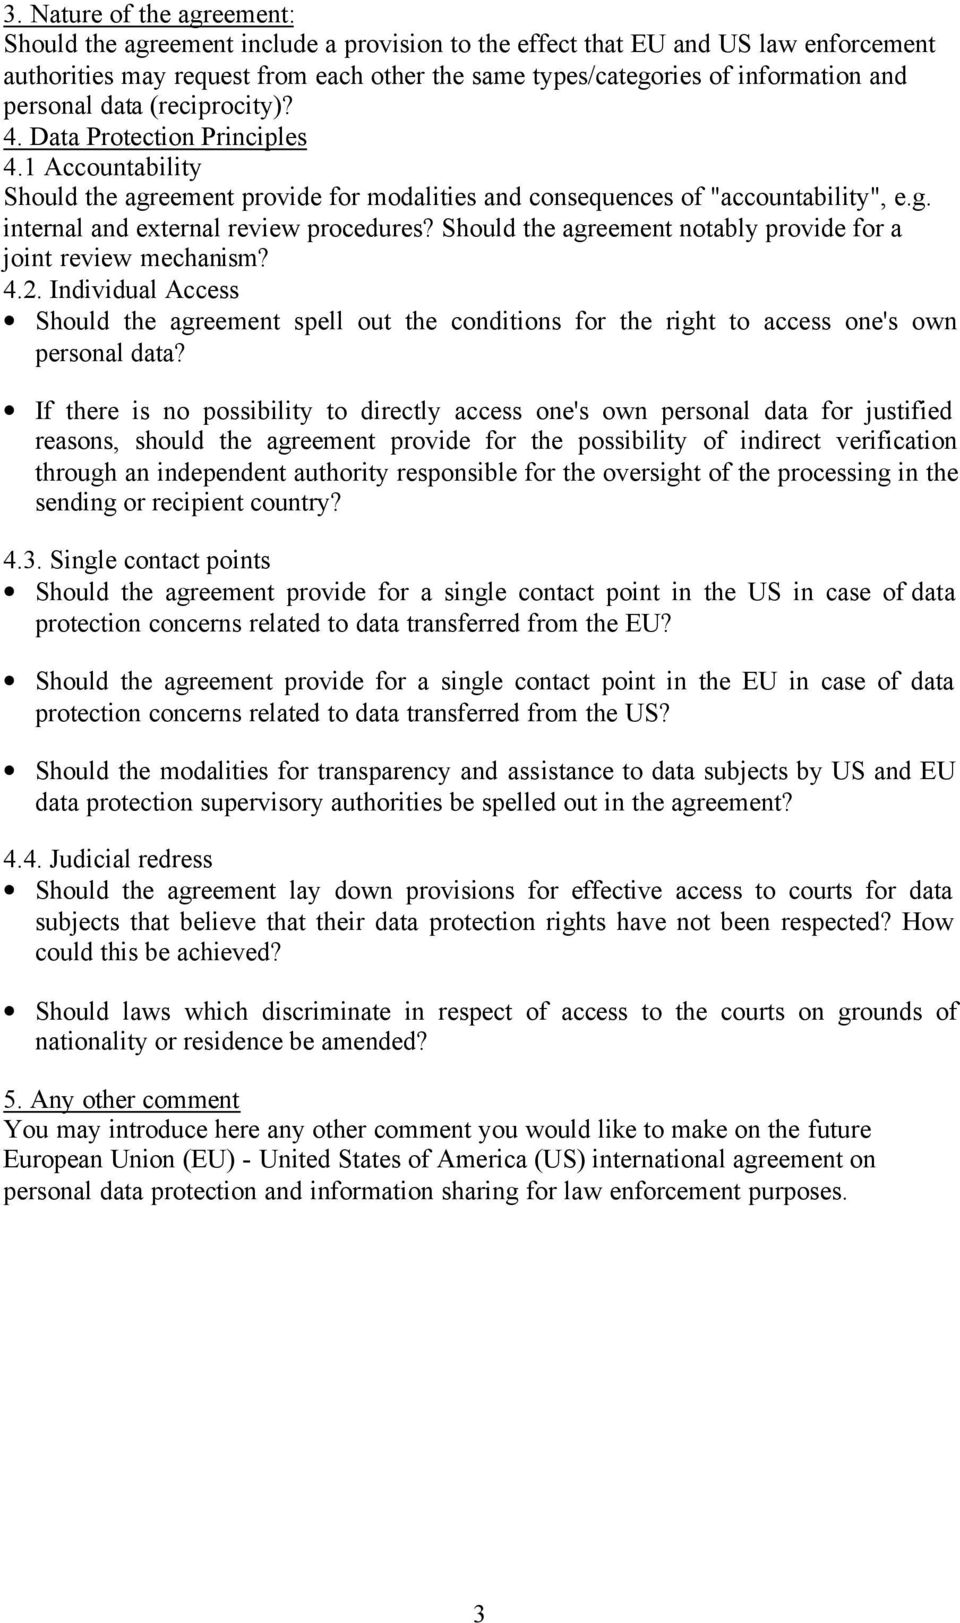 Should the agreement notably provide for a joint review mechanism? 4.2. Individual Access Should the agreement spell out the conditions for the right to access one's own personal data?